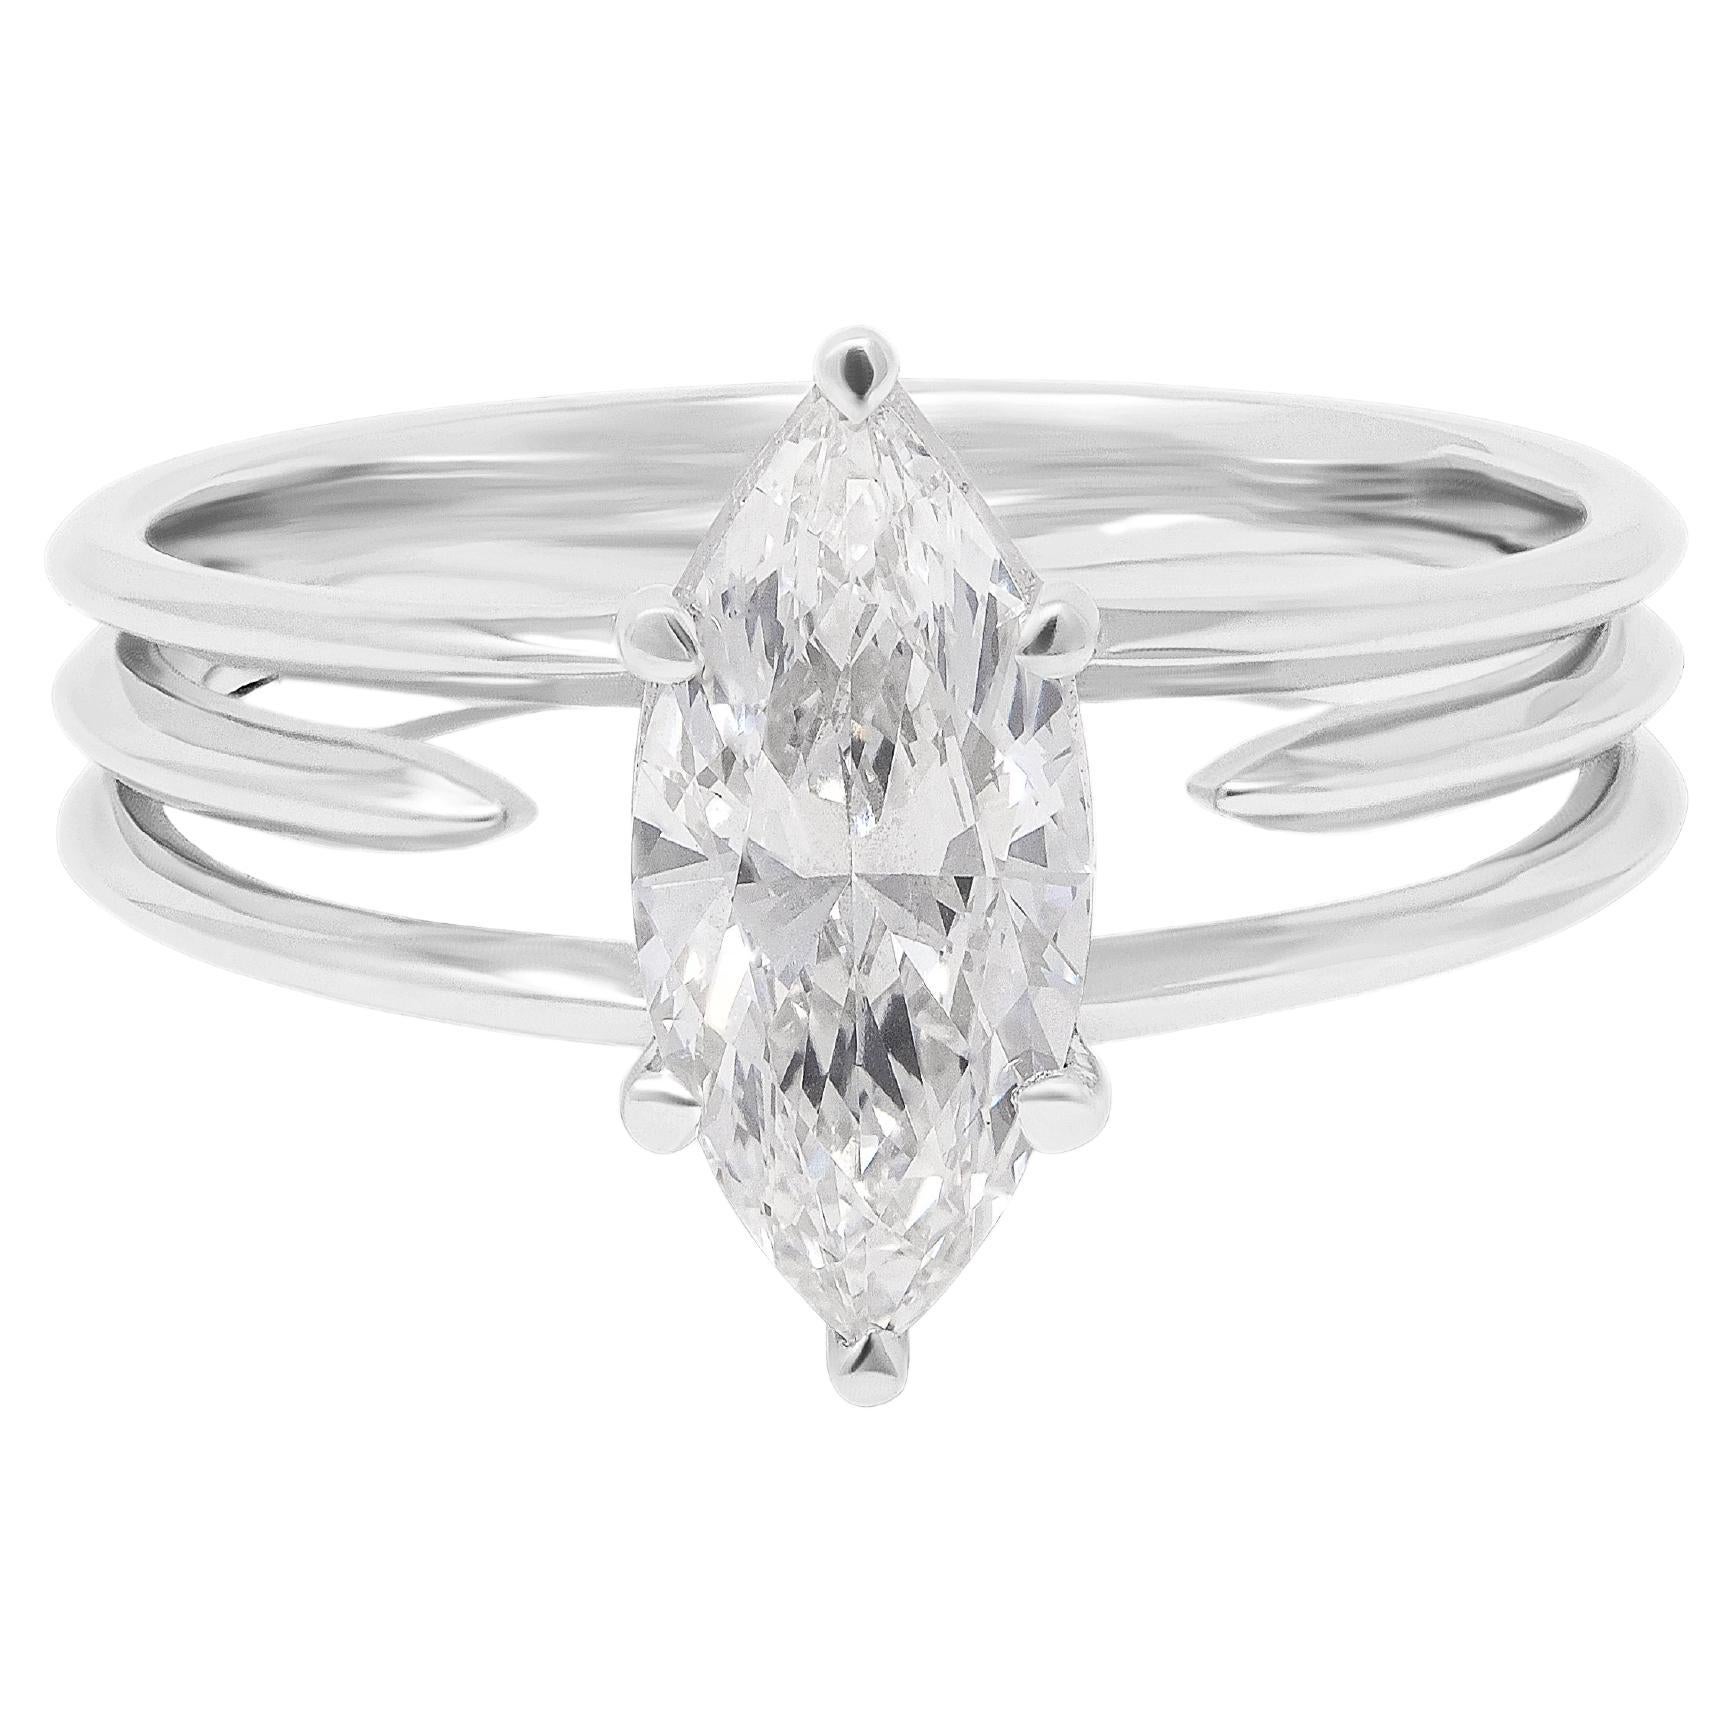 For Sale:  1.22 Carat GIA Certified Marquise Cut Diamond Platinum Architectural Ring